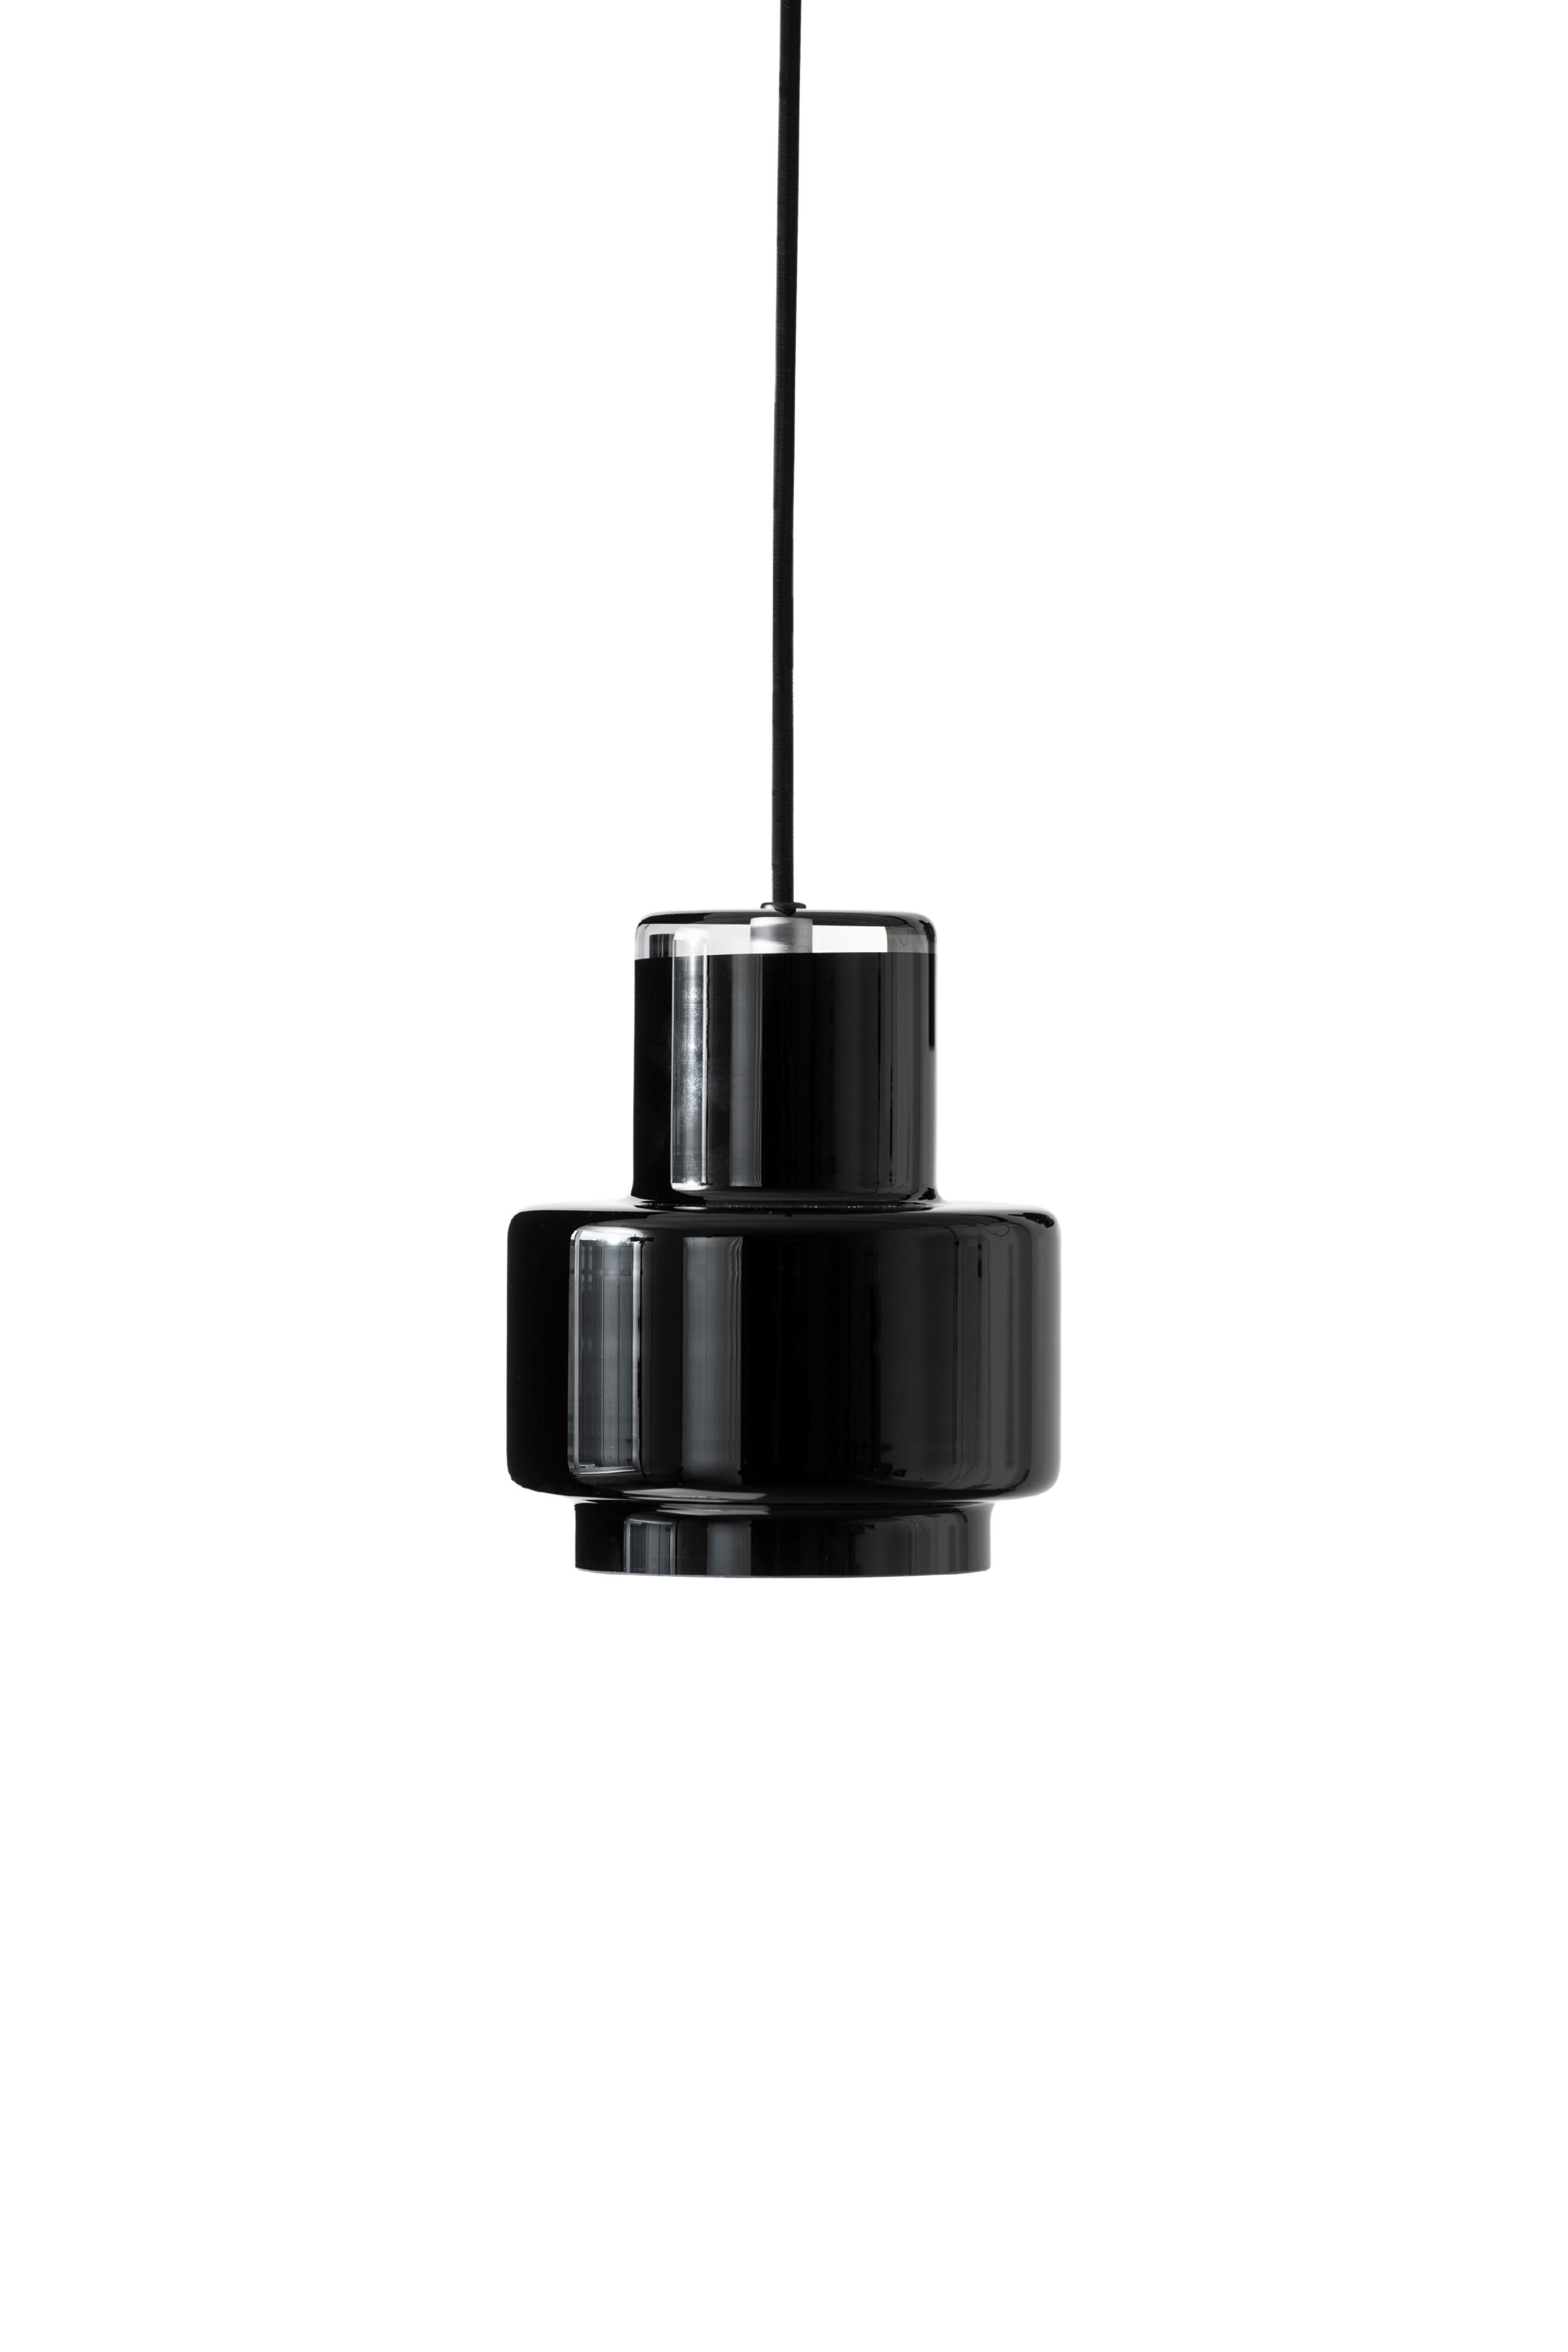 Pair of 'Multi S' Glass Pendants in Black by Jokinen and Konu for Innolux. Executed in hand blown black glass. 

The award winning Multi glass collection is based on an artistically innovative form of modular glass blowing mold developed by the